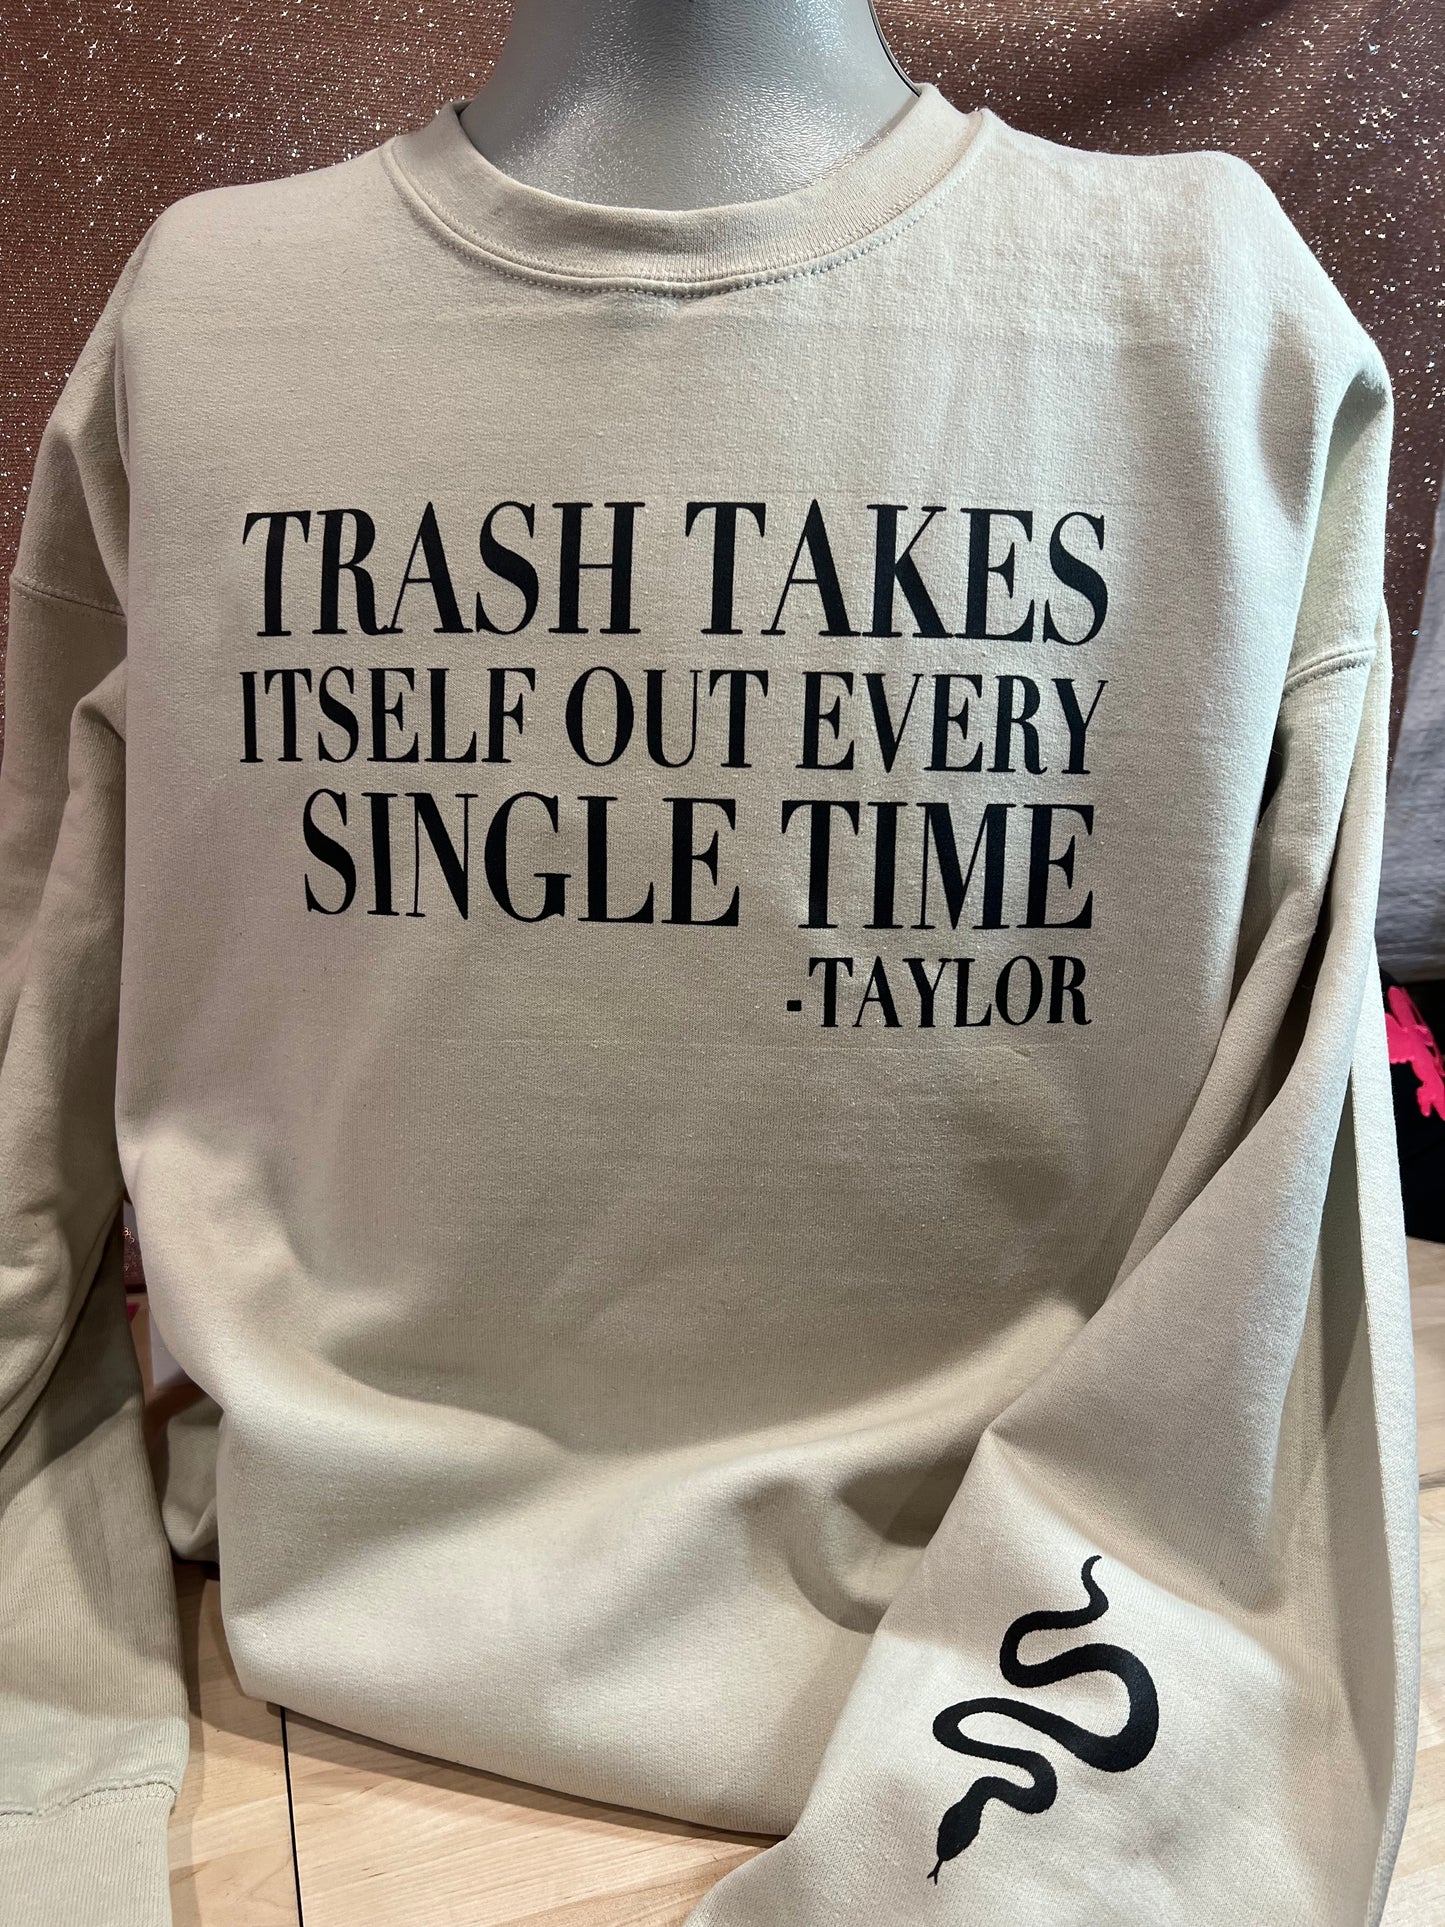 TRASH TAKES ITSELF OUT EVERY SINGLE TIME